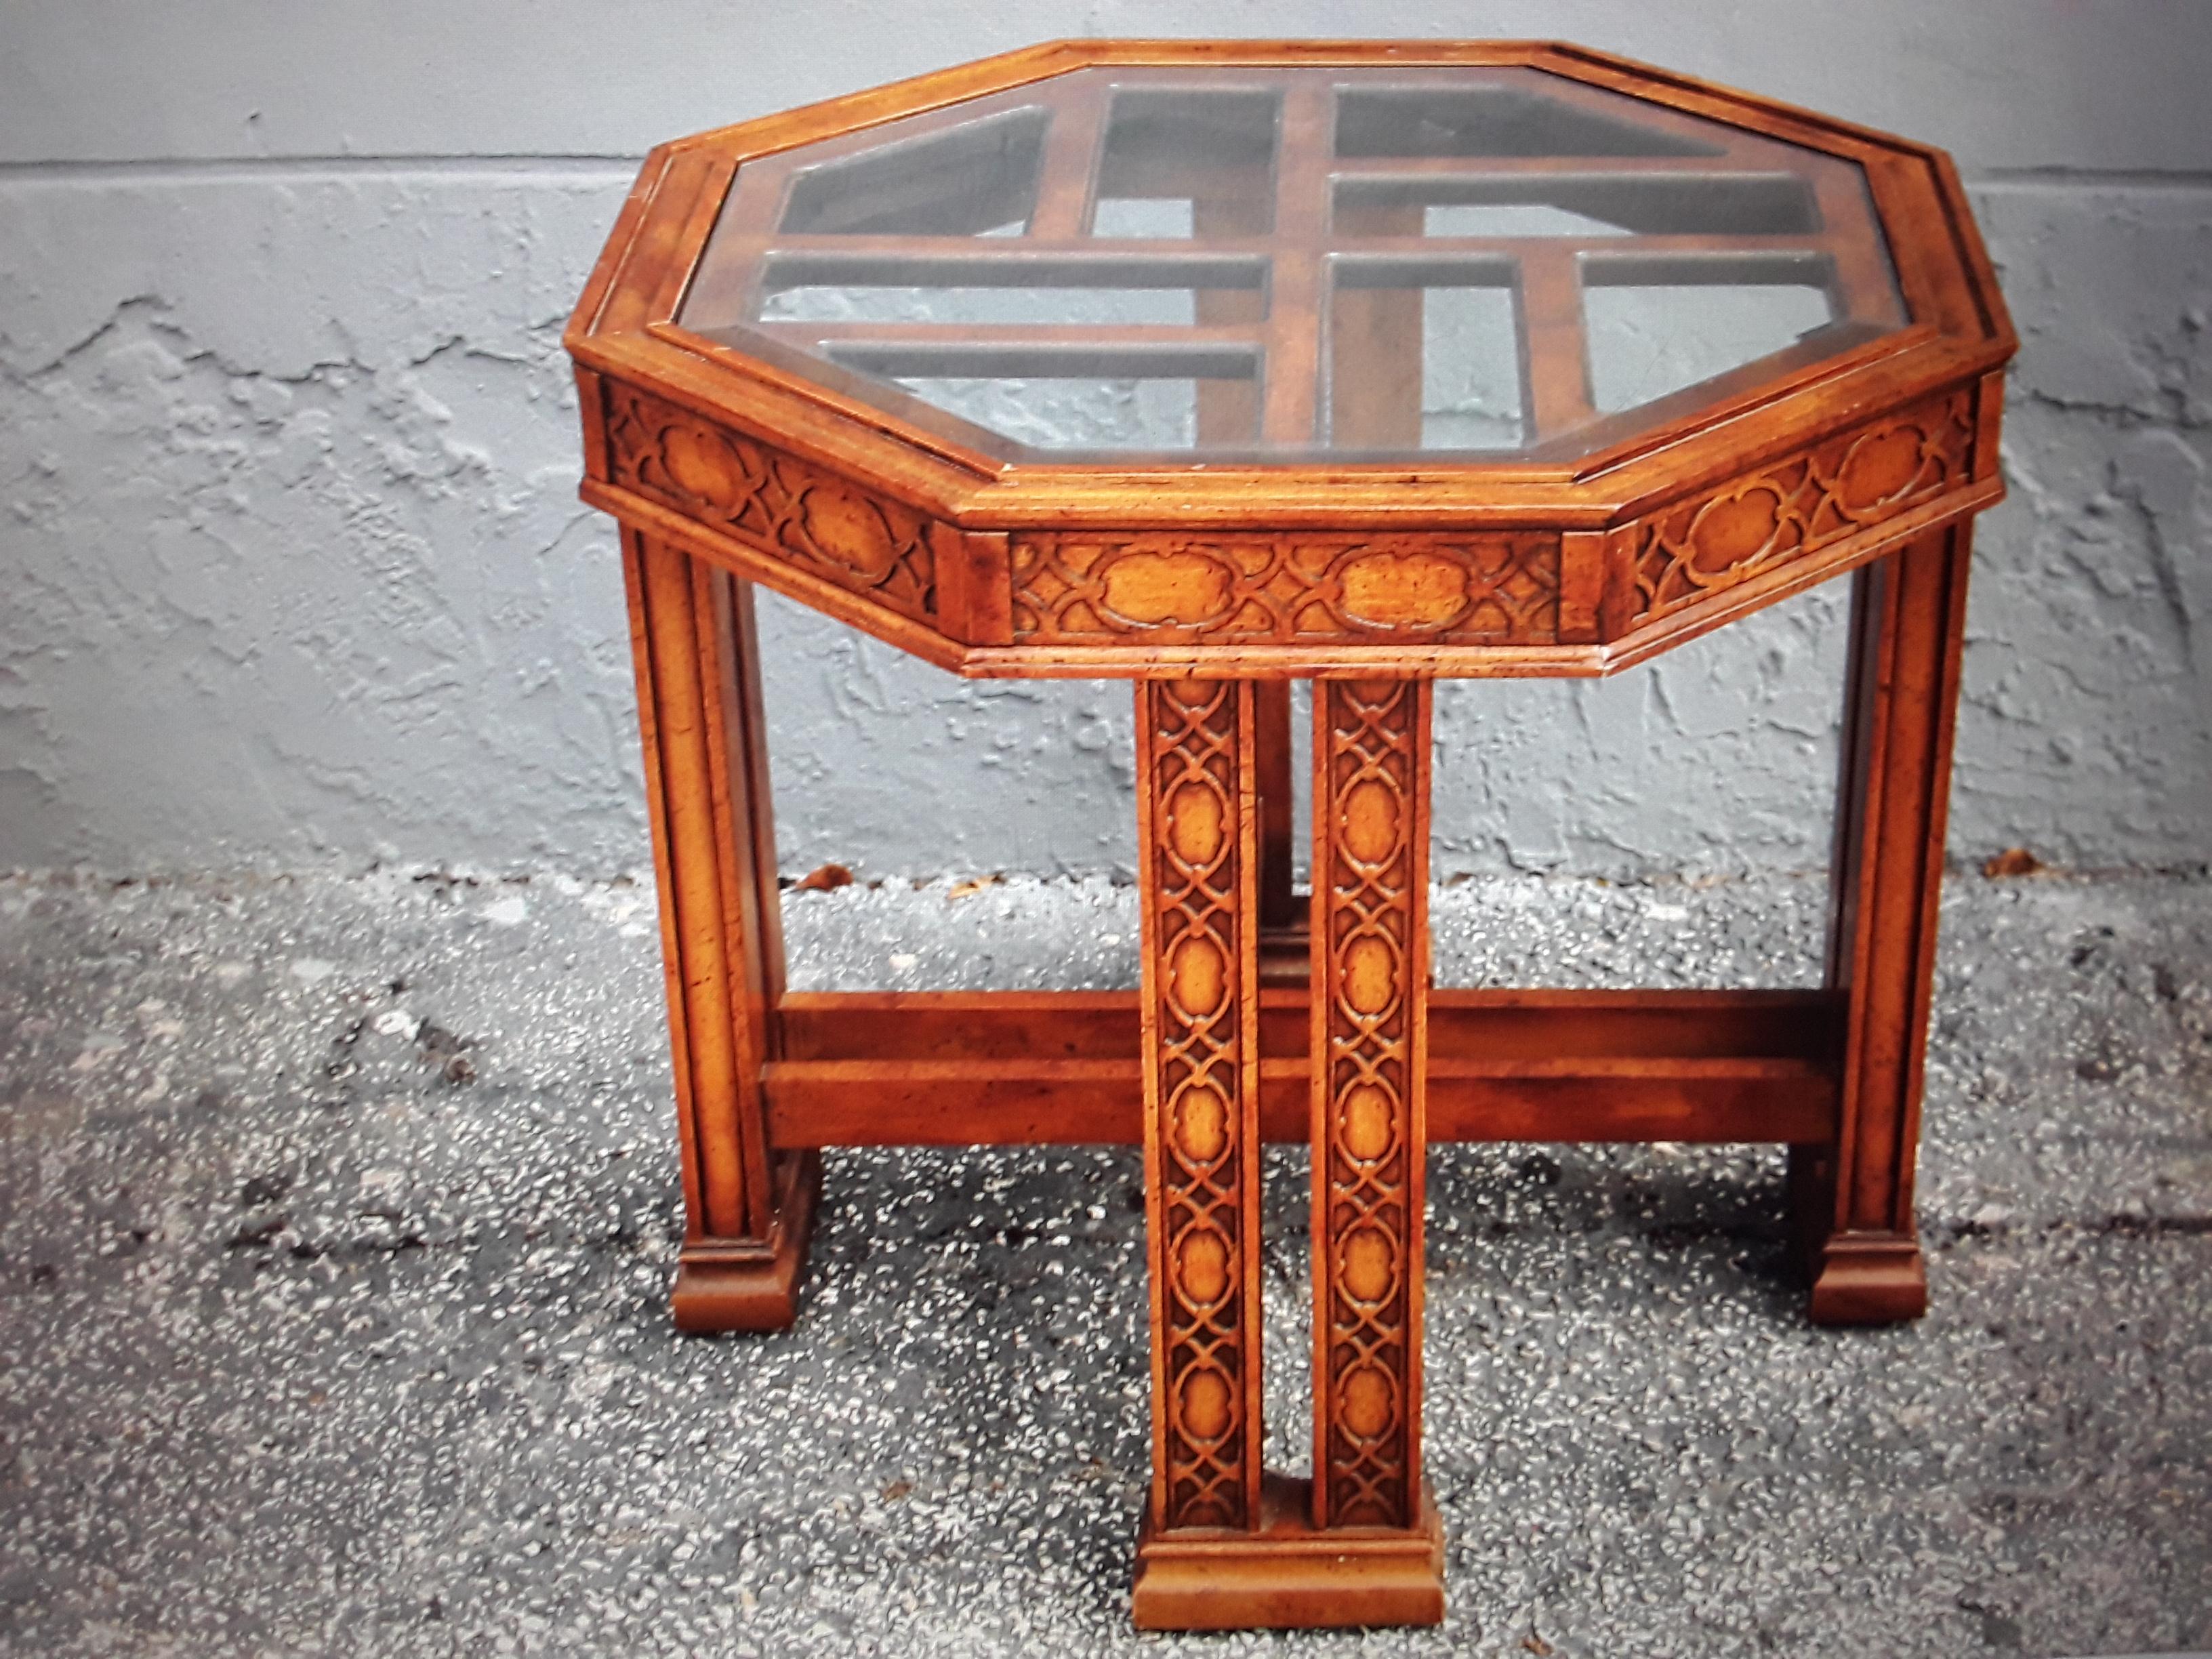 c1960's Mid Century Modern Exotic Wood Fretworked Accent/ Occasional/ End Table. Glass insert top.